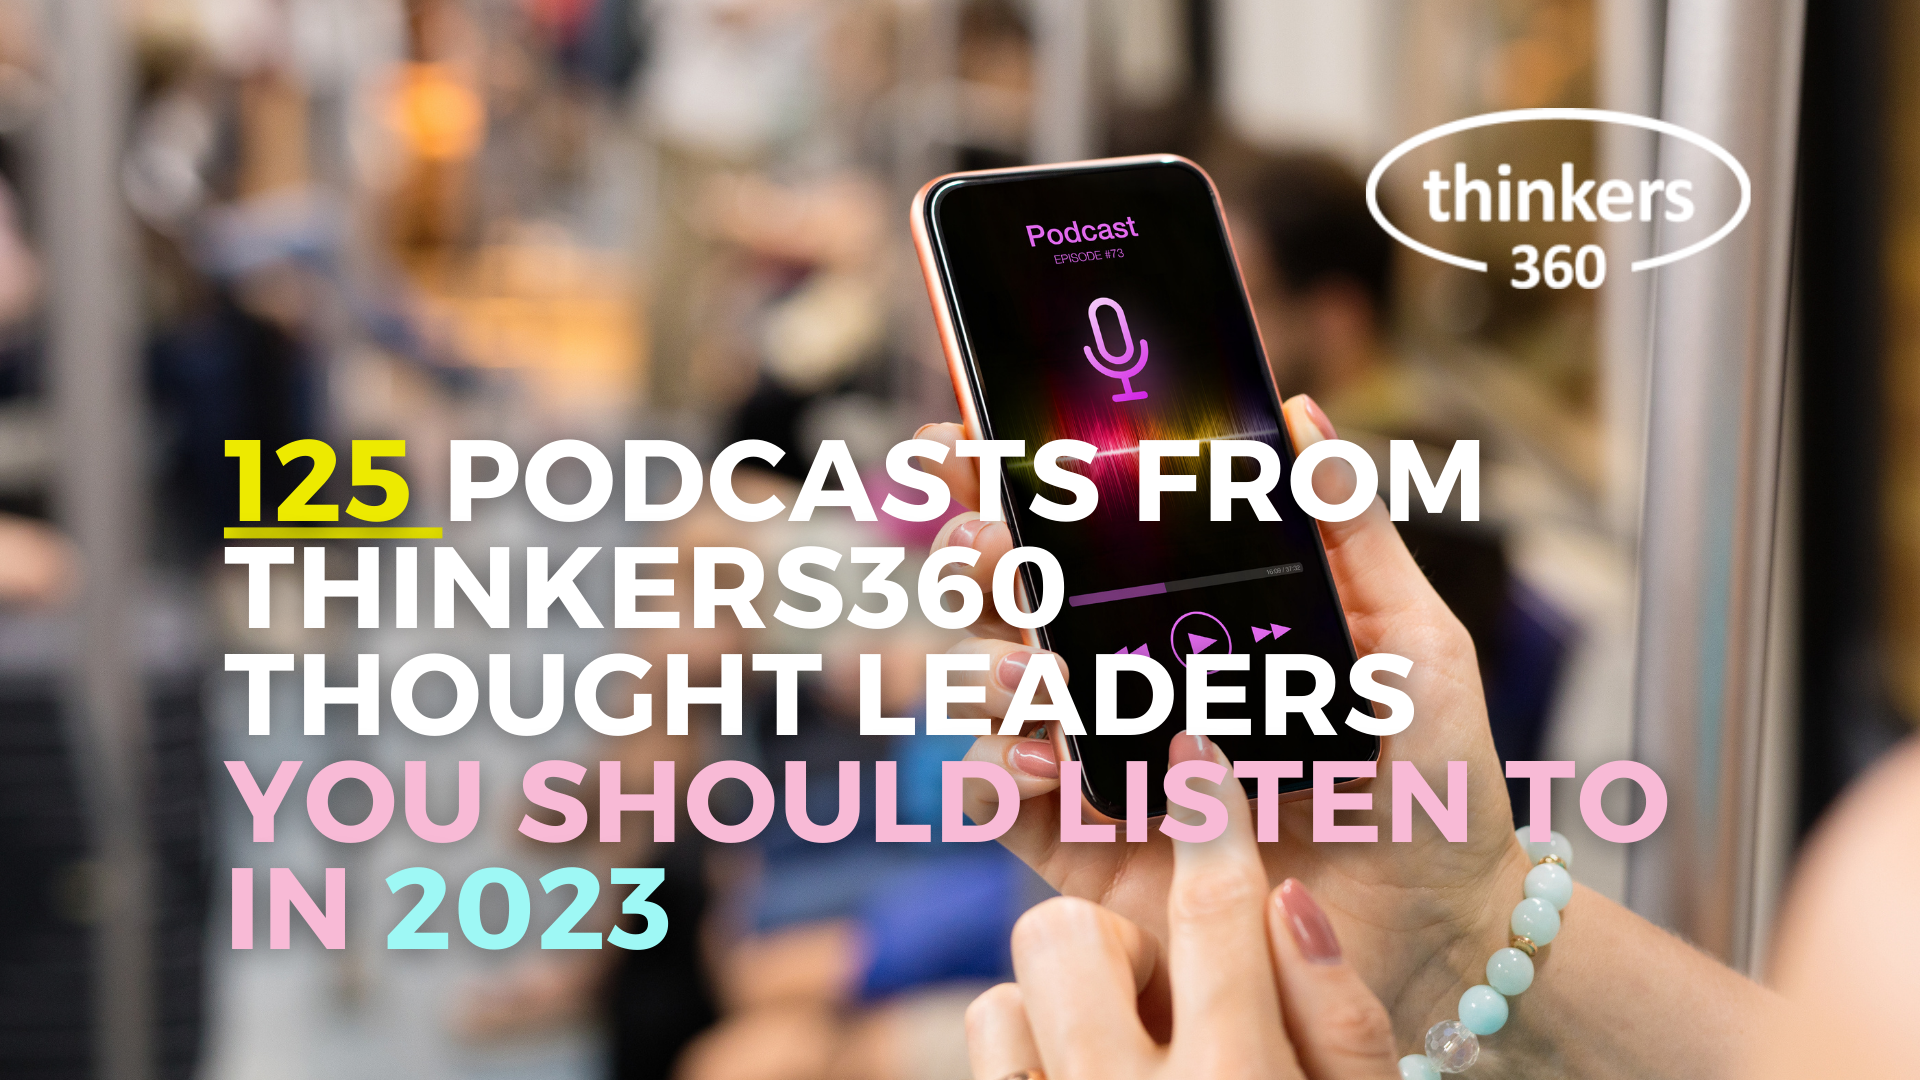 125 Podcasts from Thinkers360 Thought Leaders You Should Listen To in 2023